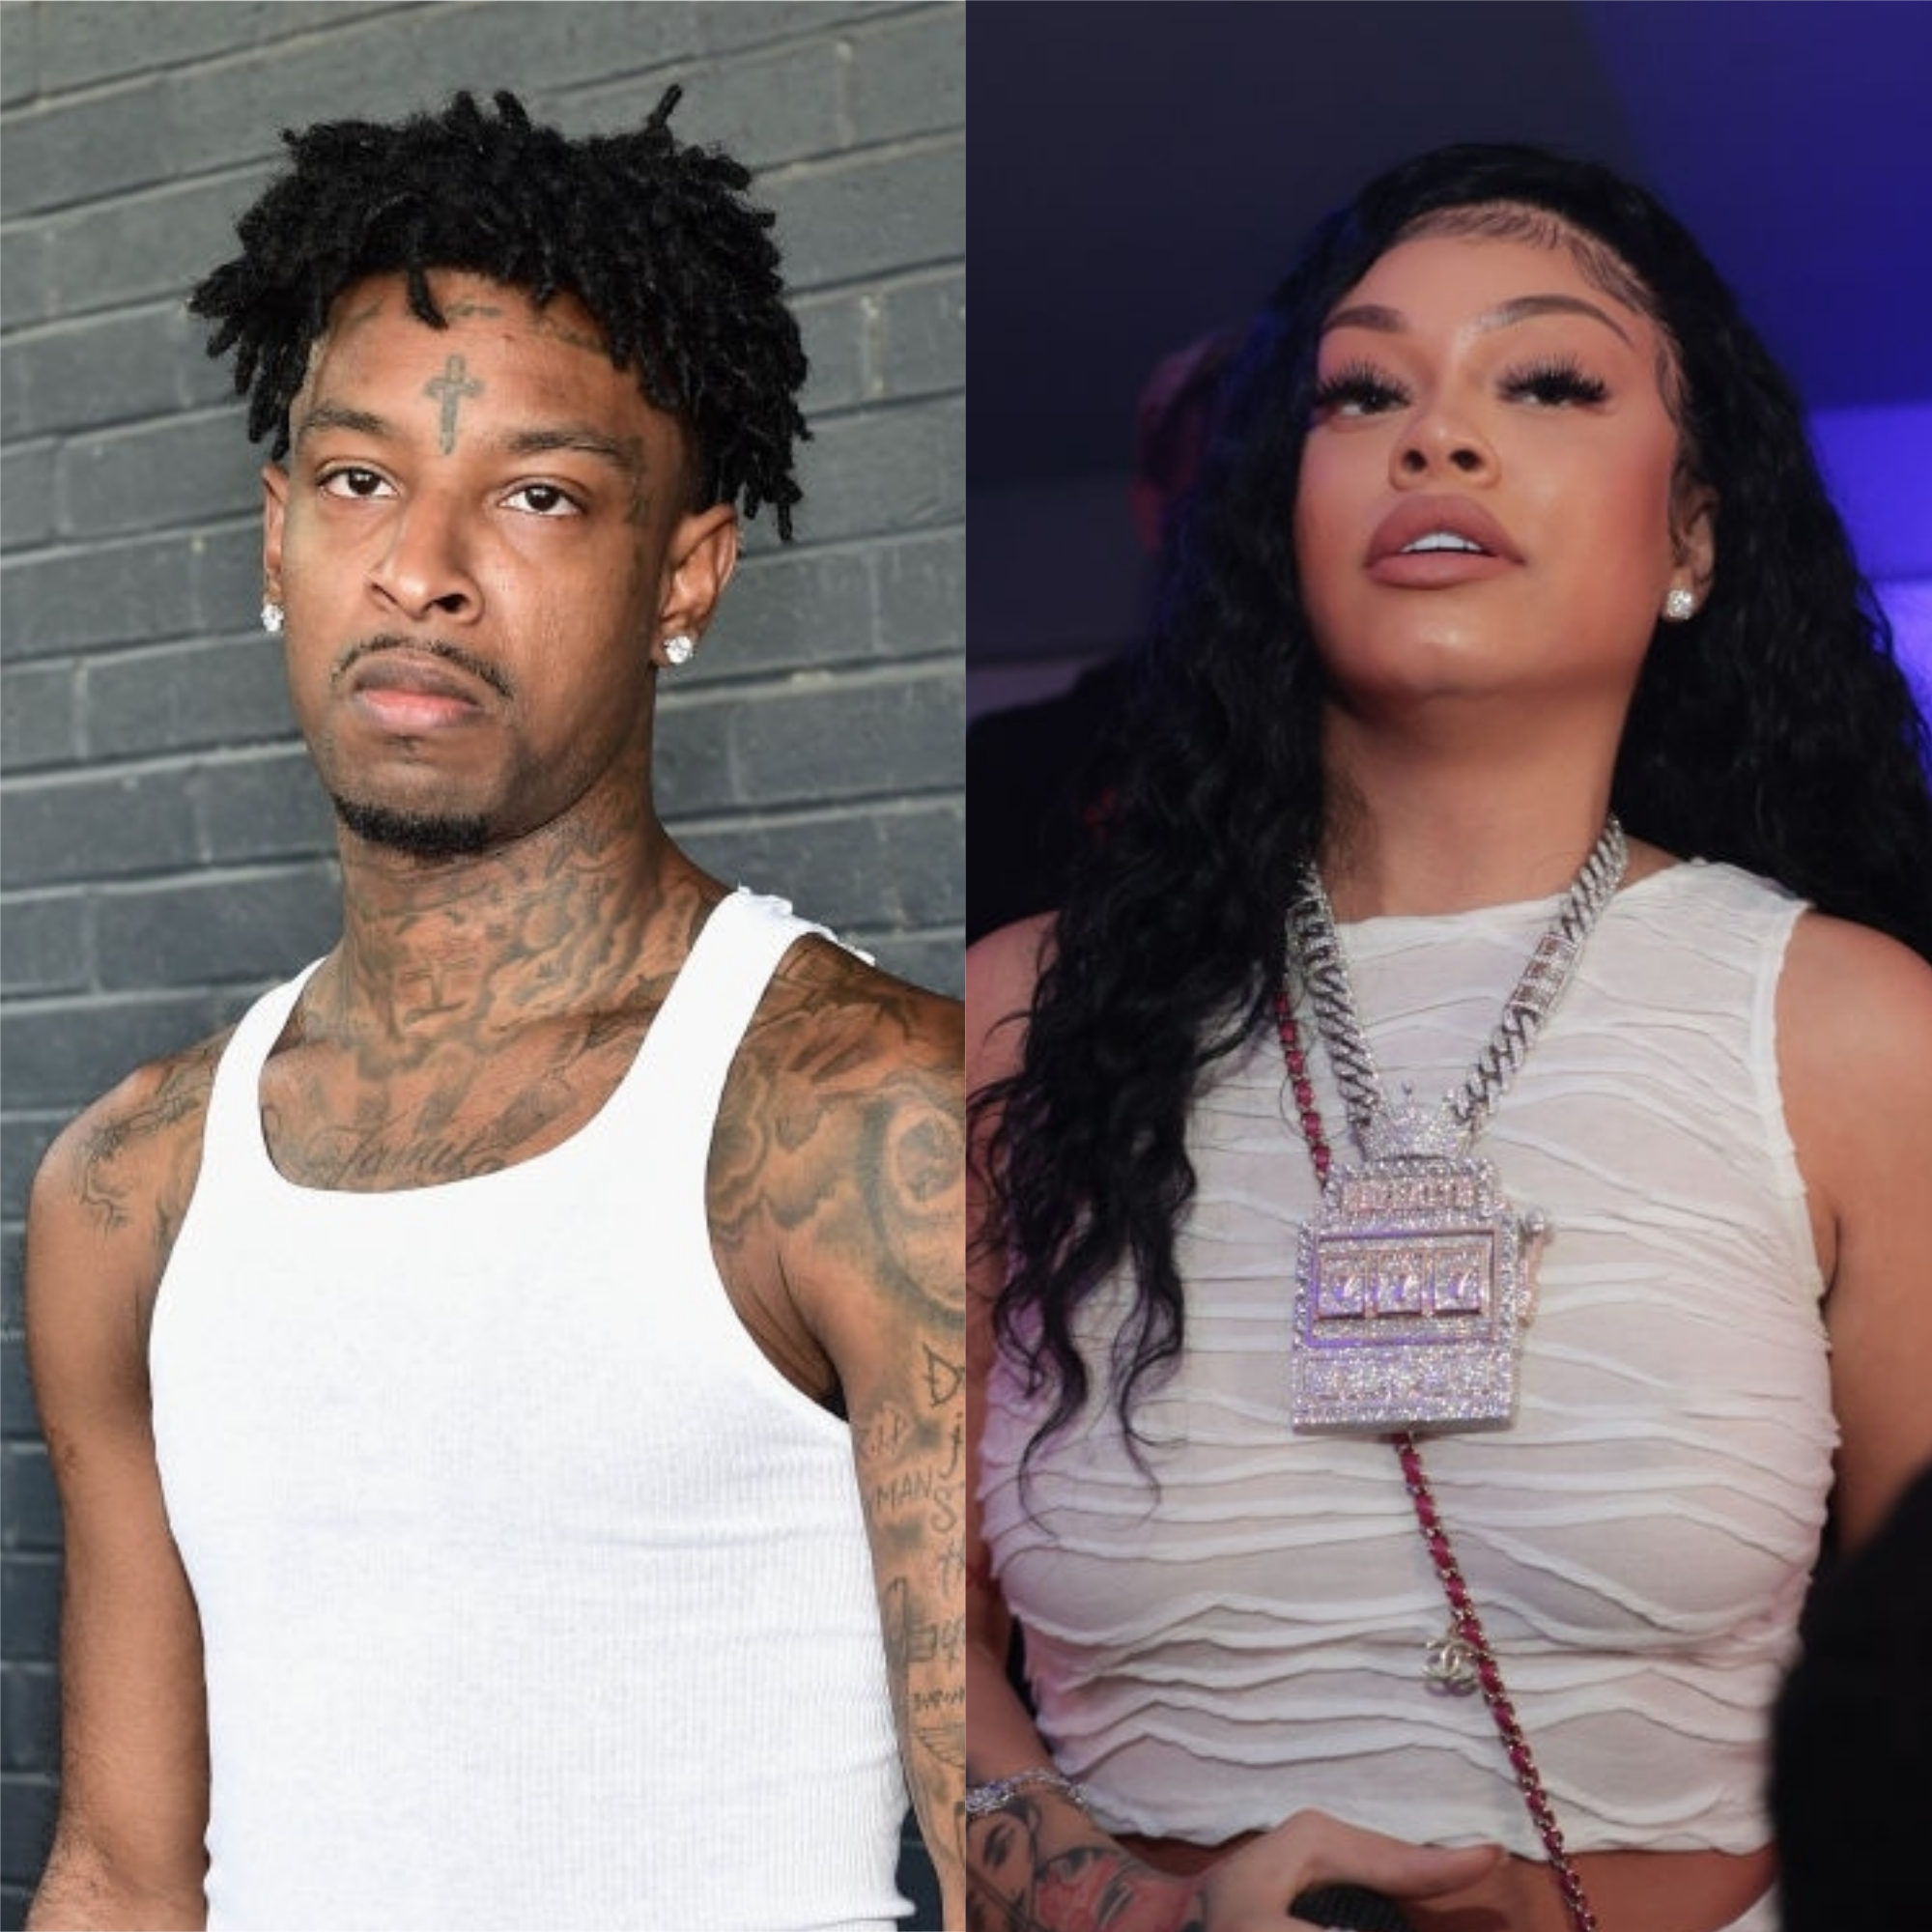 21 SAVAGE BACK TOGETHER WITH WIFE KEYANA AMID LATTO DATING RUMORS 